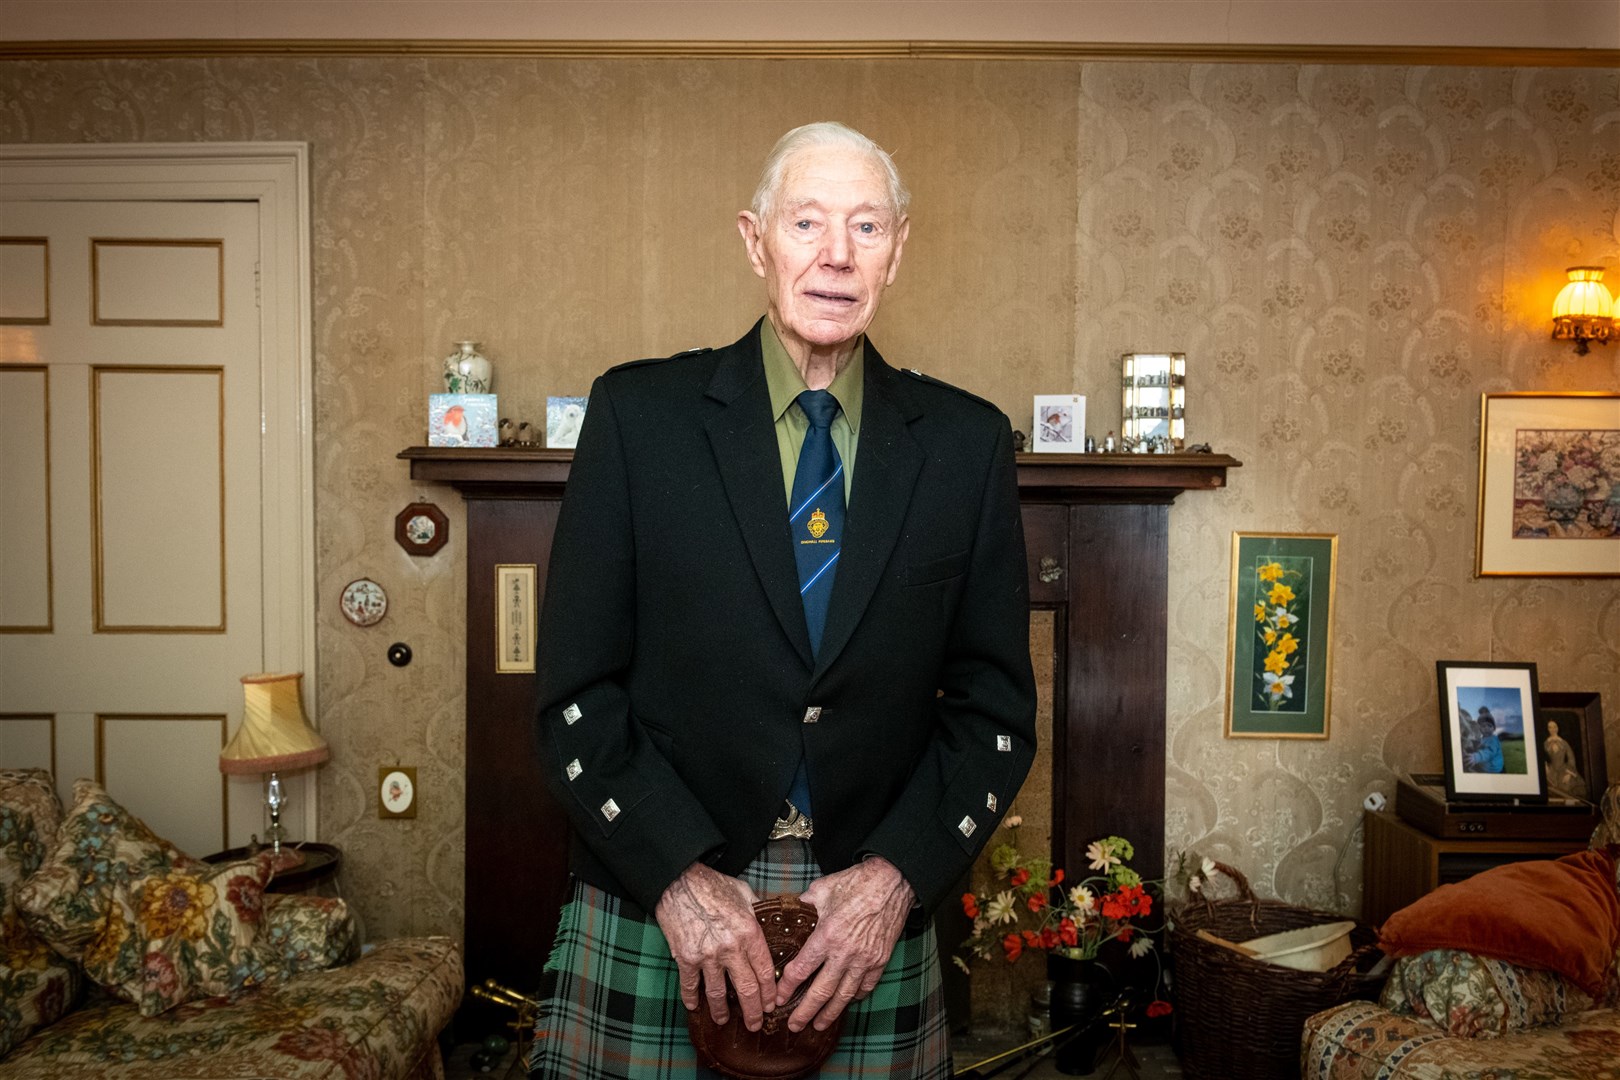 Donald Armstrong, of Dingwall, received a BEM for services to music and the community in New Year Honours List. Picture: Callum Mackay